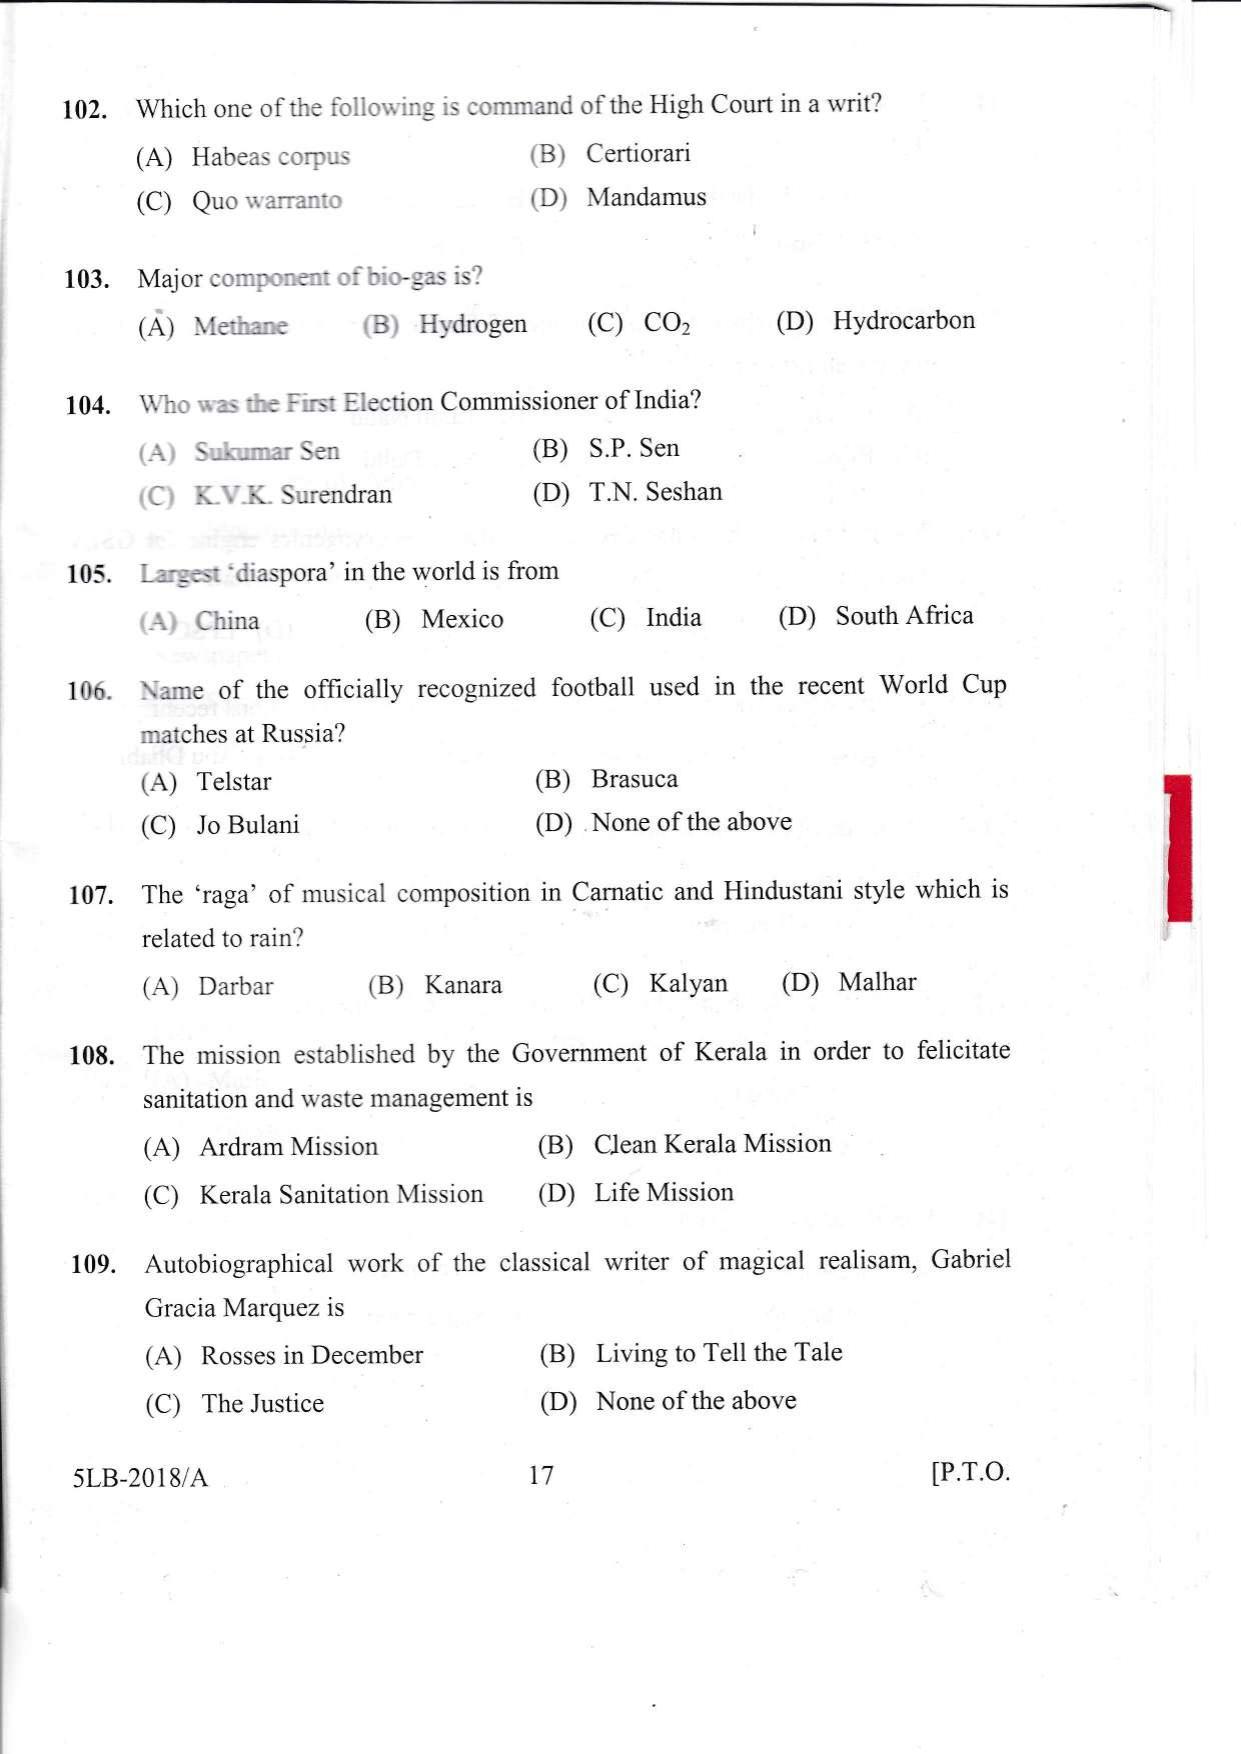 KLEE 5 Year LLB Exam 2018 Question Paper - Page 17